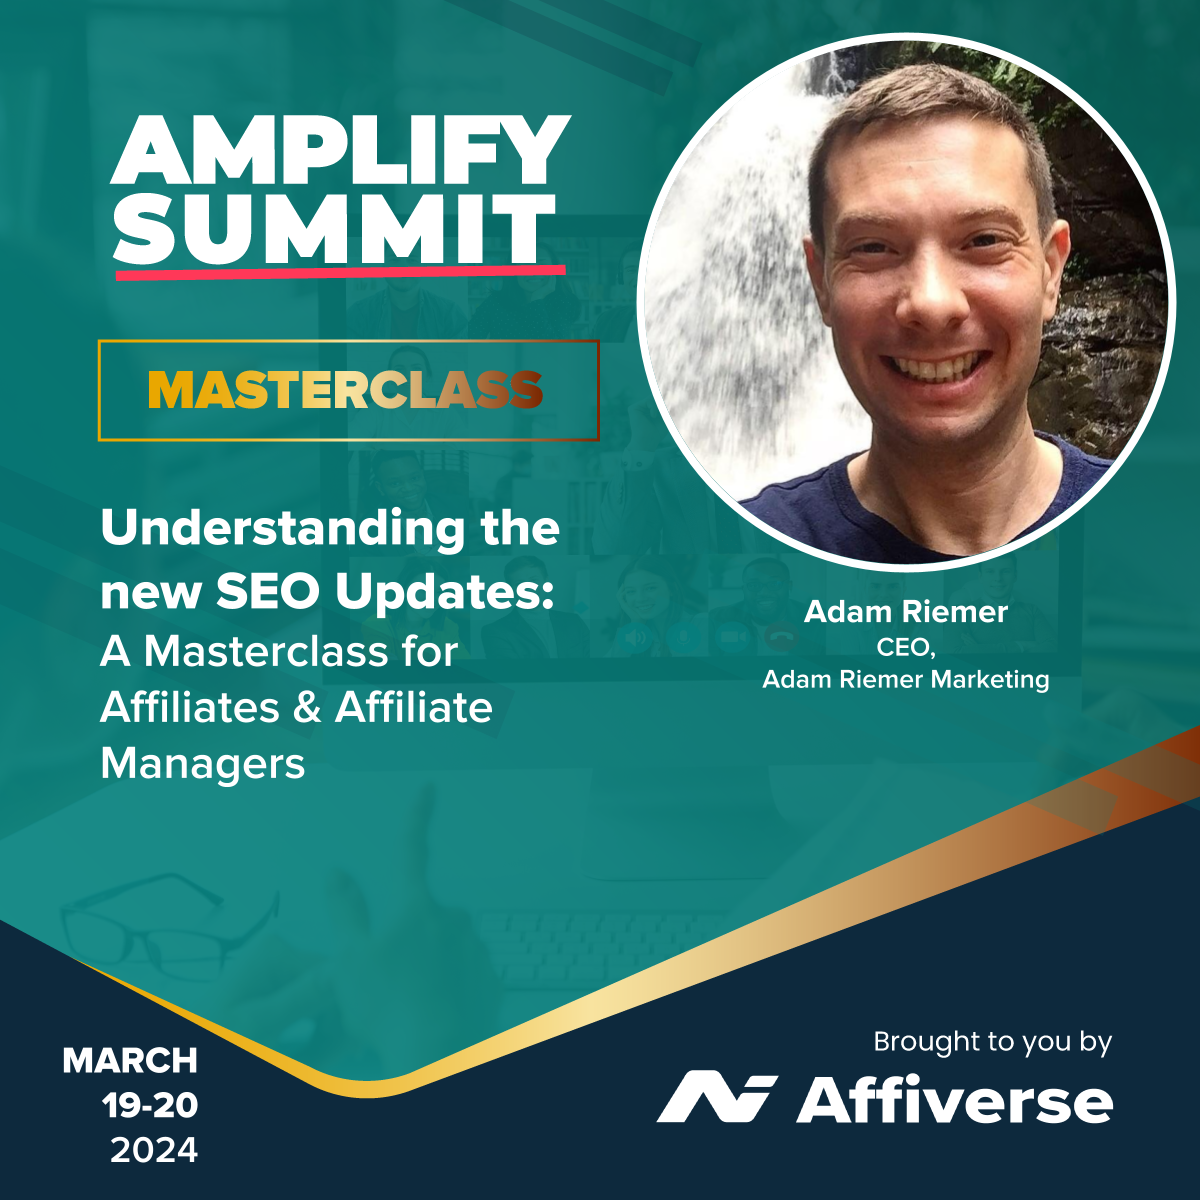 Are You Ready To AMPLIFY? MasterClass for Affiliates and Affiliate Managers